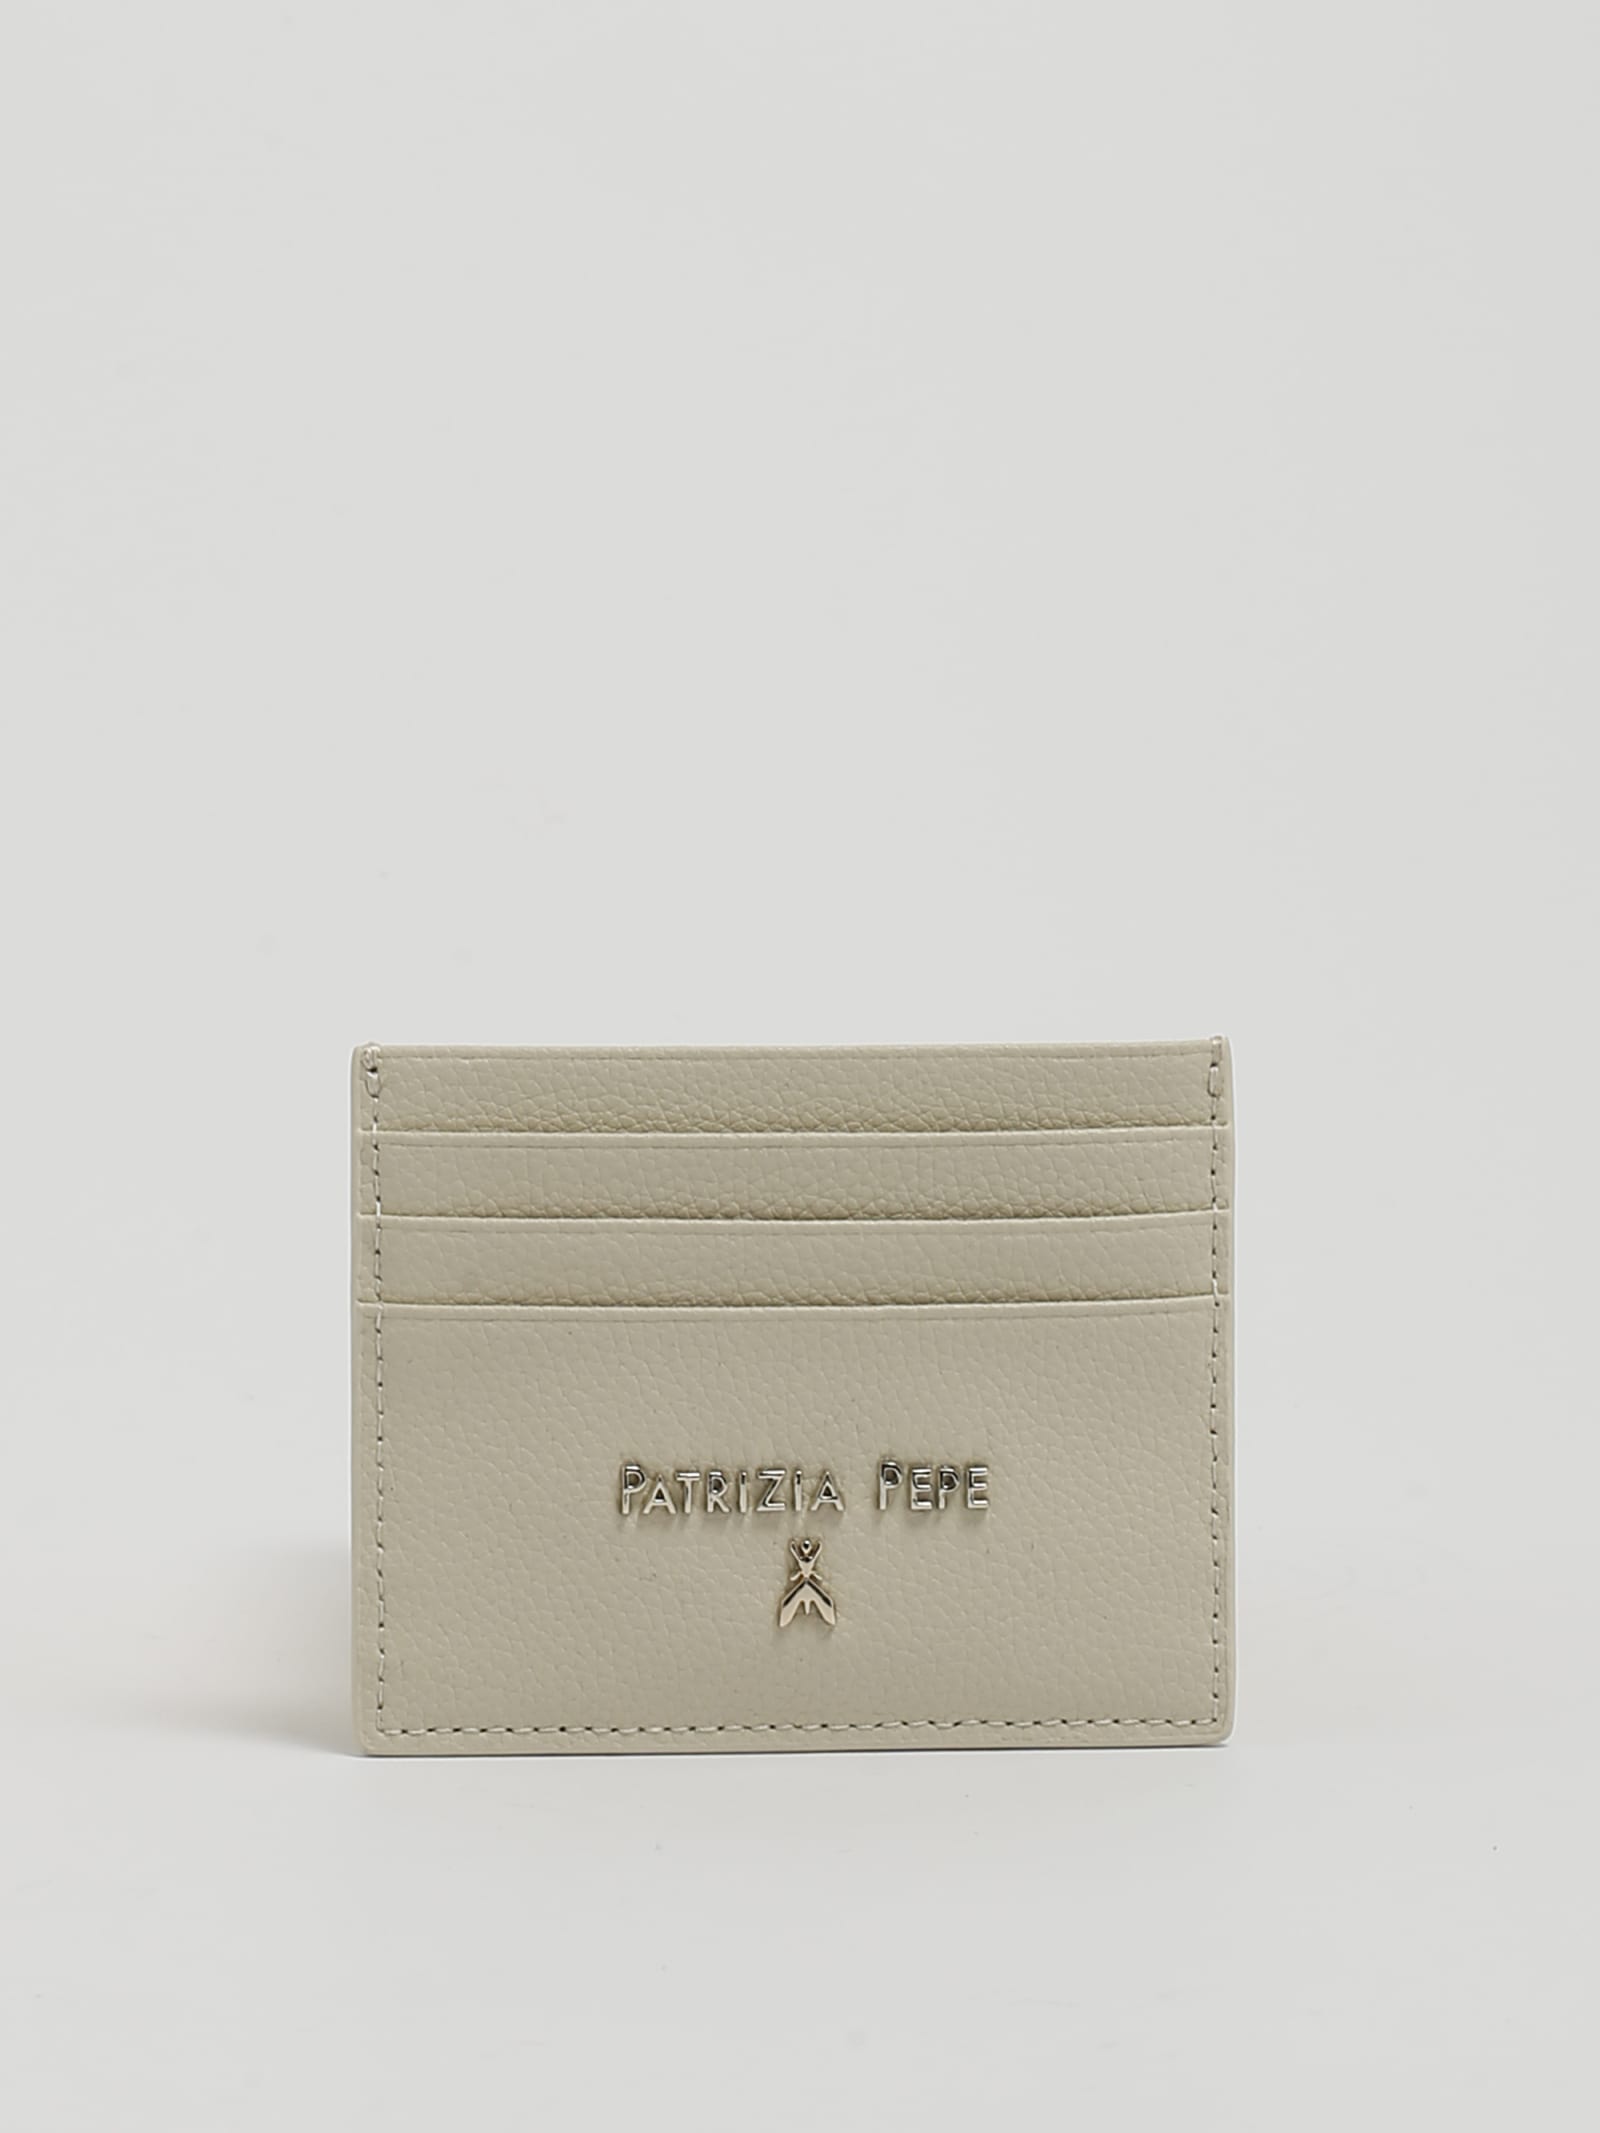 Patrizia Pepe Leather Wallet In Panna